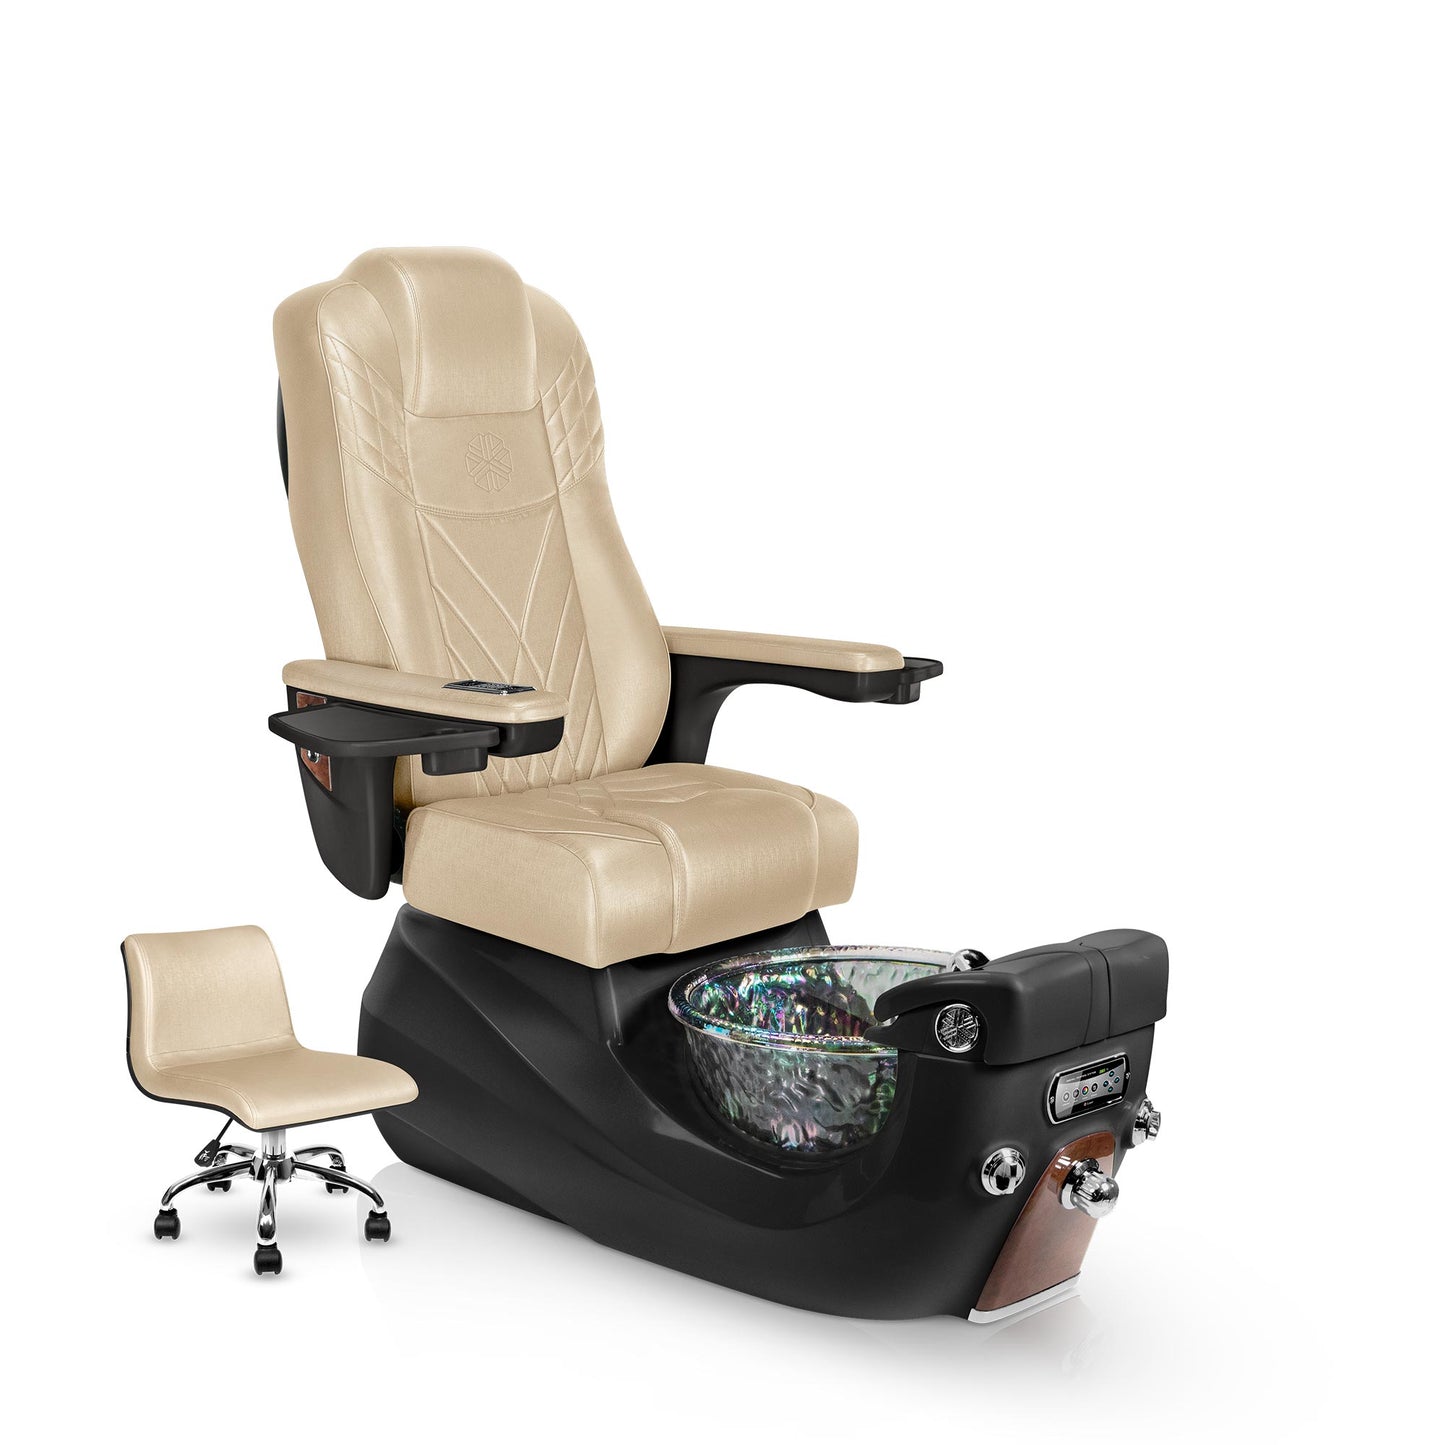 Lexor LIBERTÉ pedicure chair with glazed gold cushion and espresso spa base